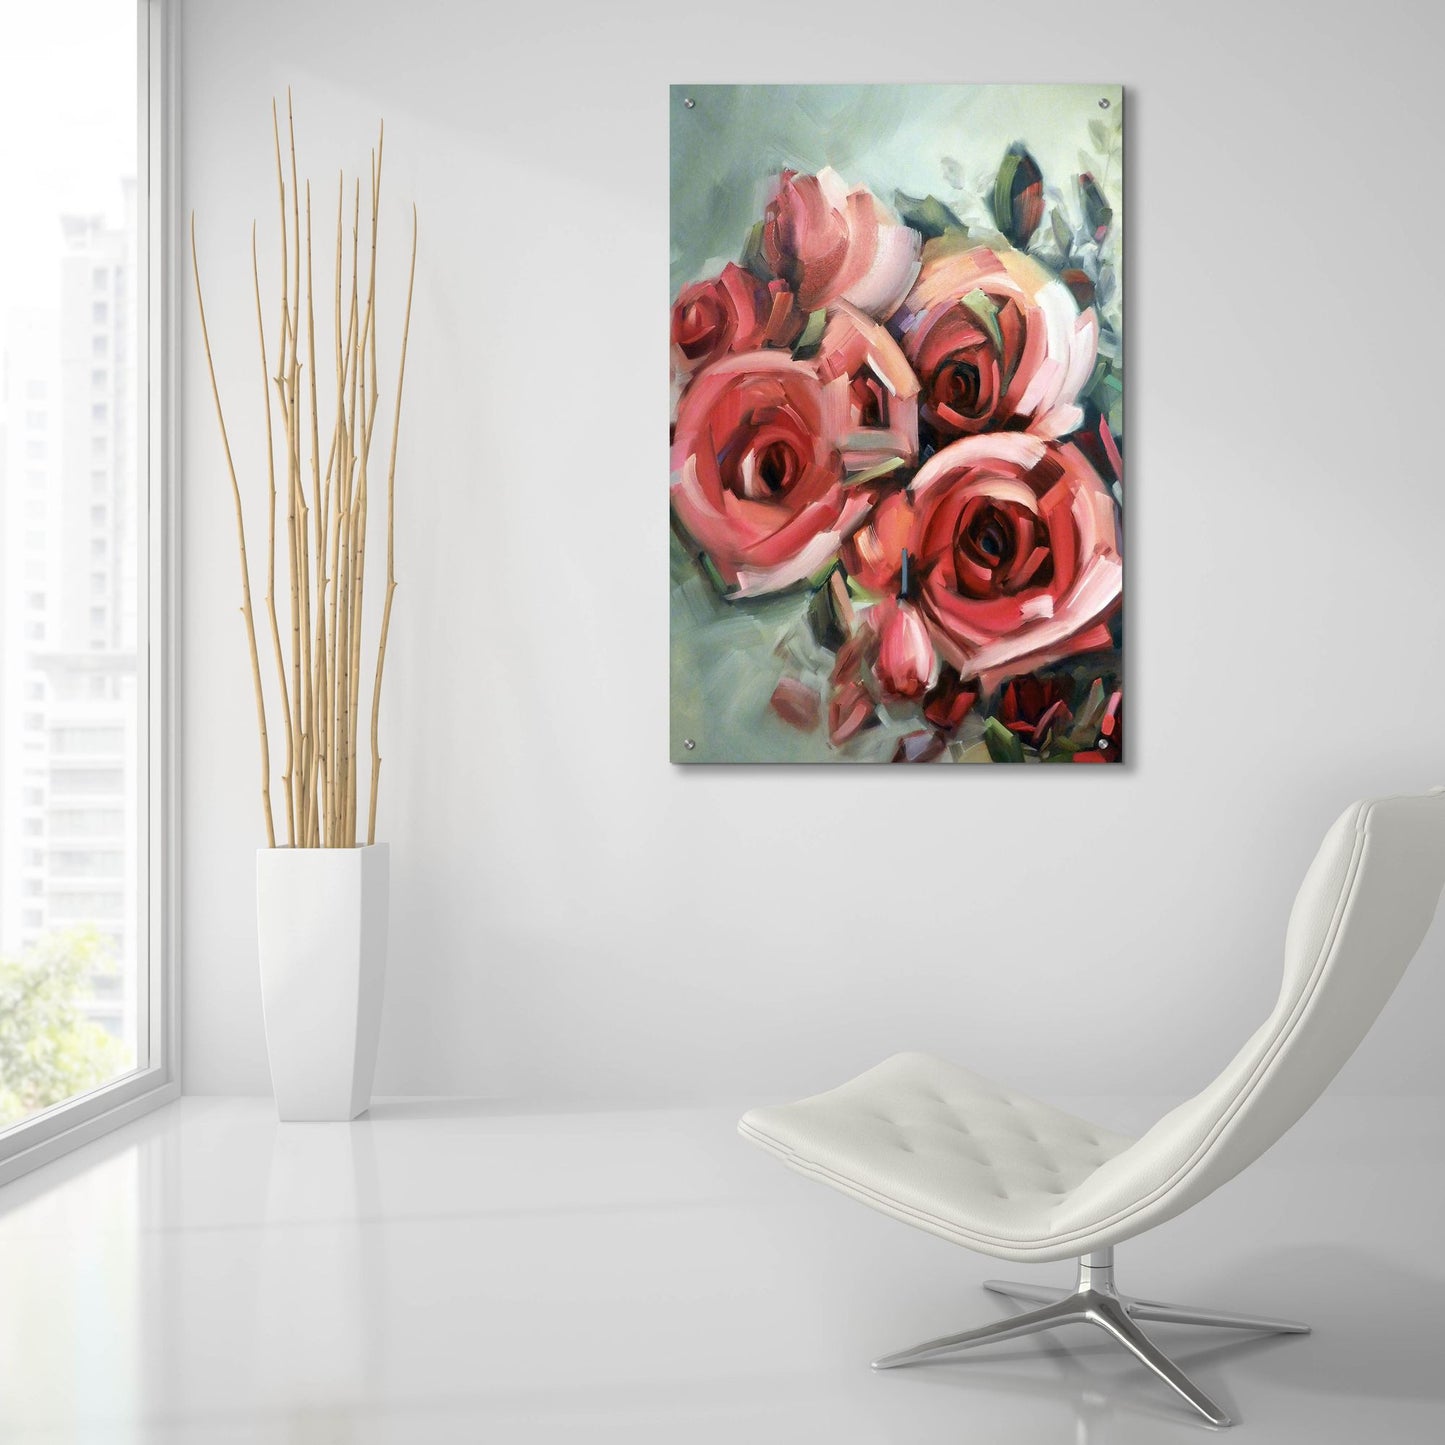 Epic Art 'Amid Scent Of Roses' by Holly Van Hart, Acrylic Glass Wall Art,24x36